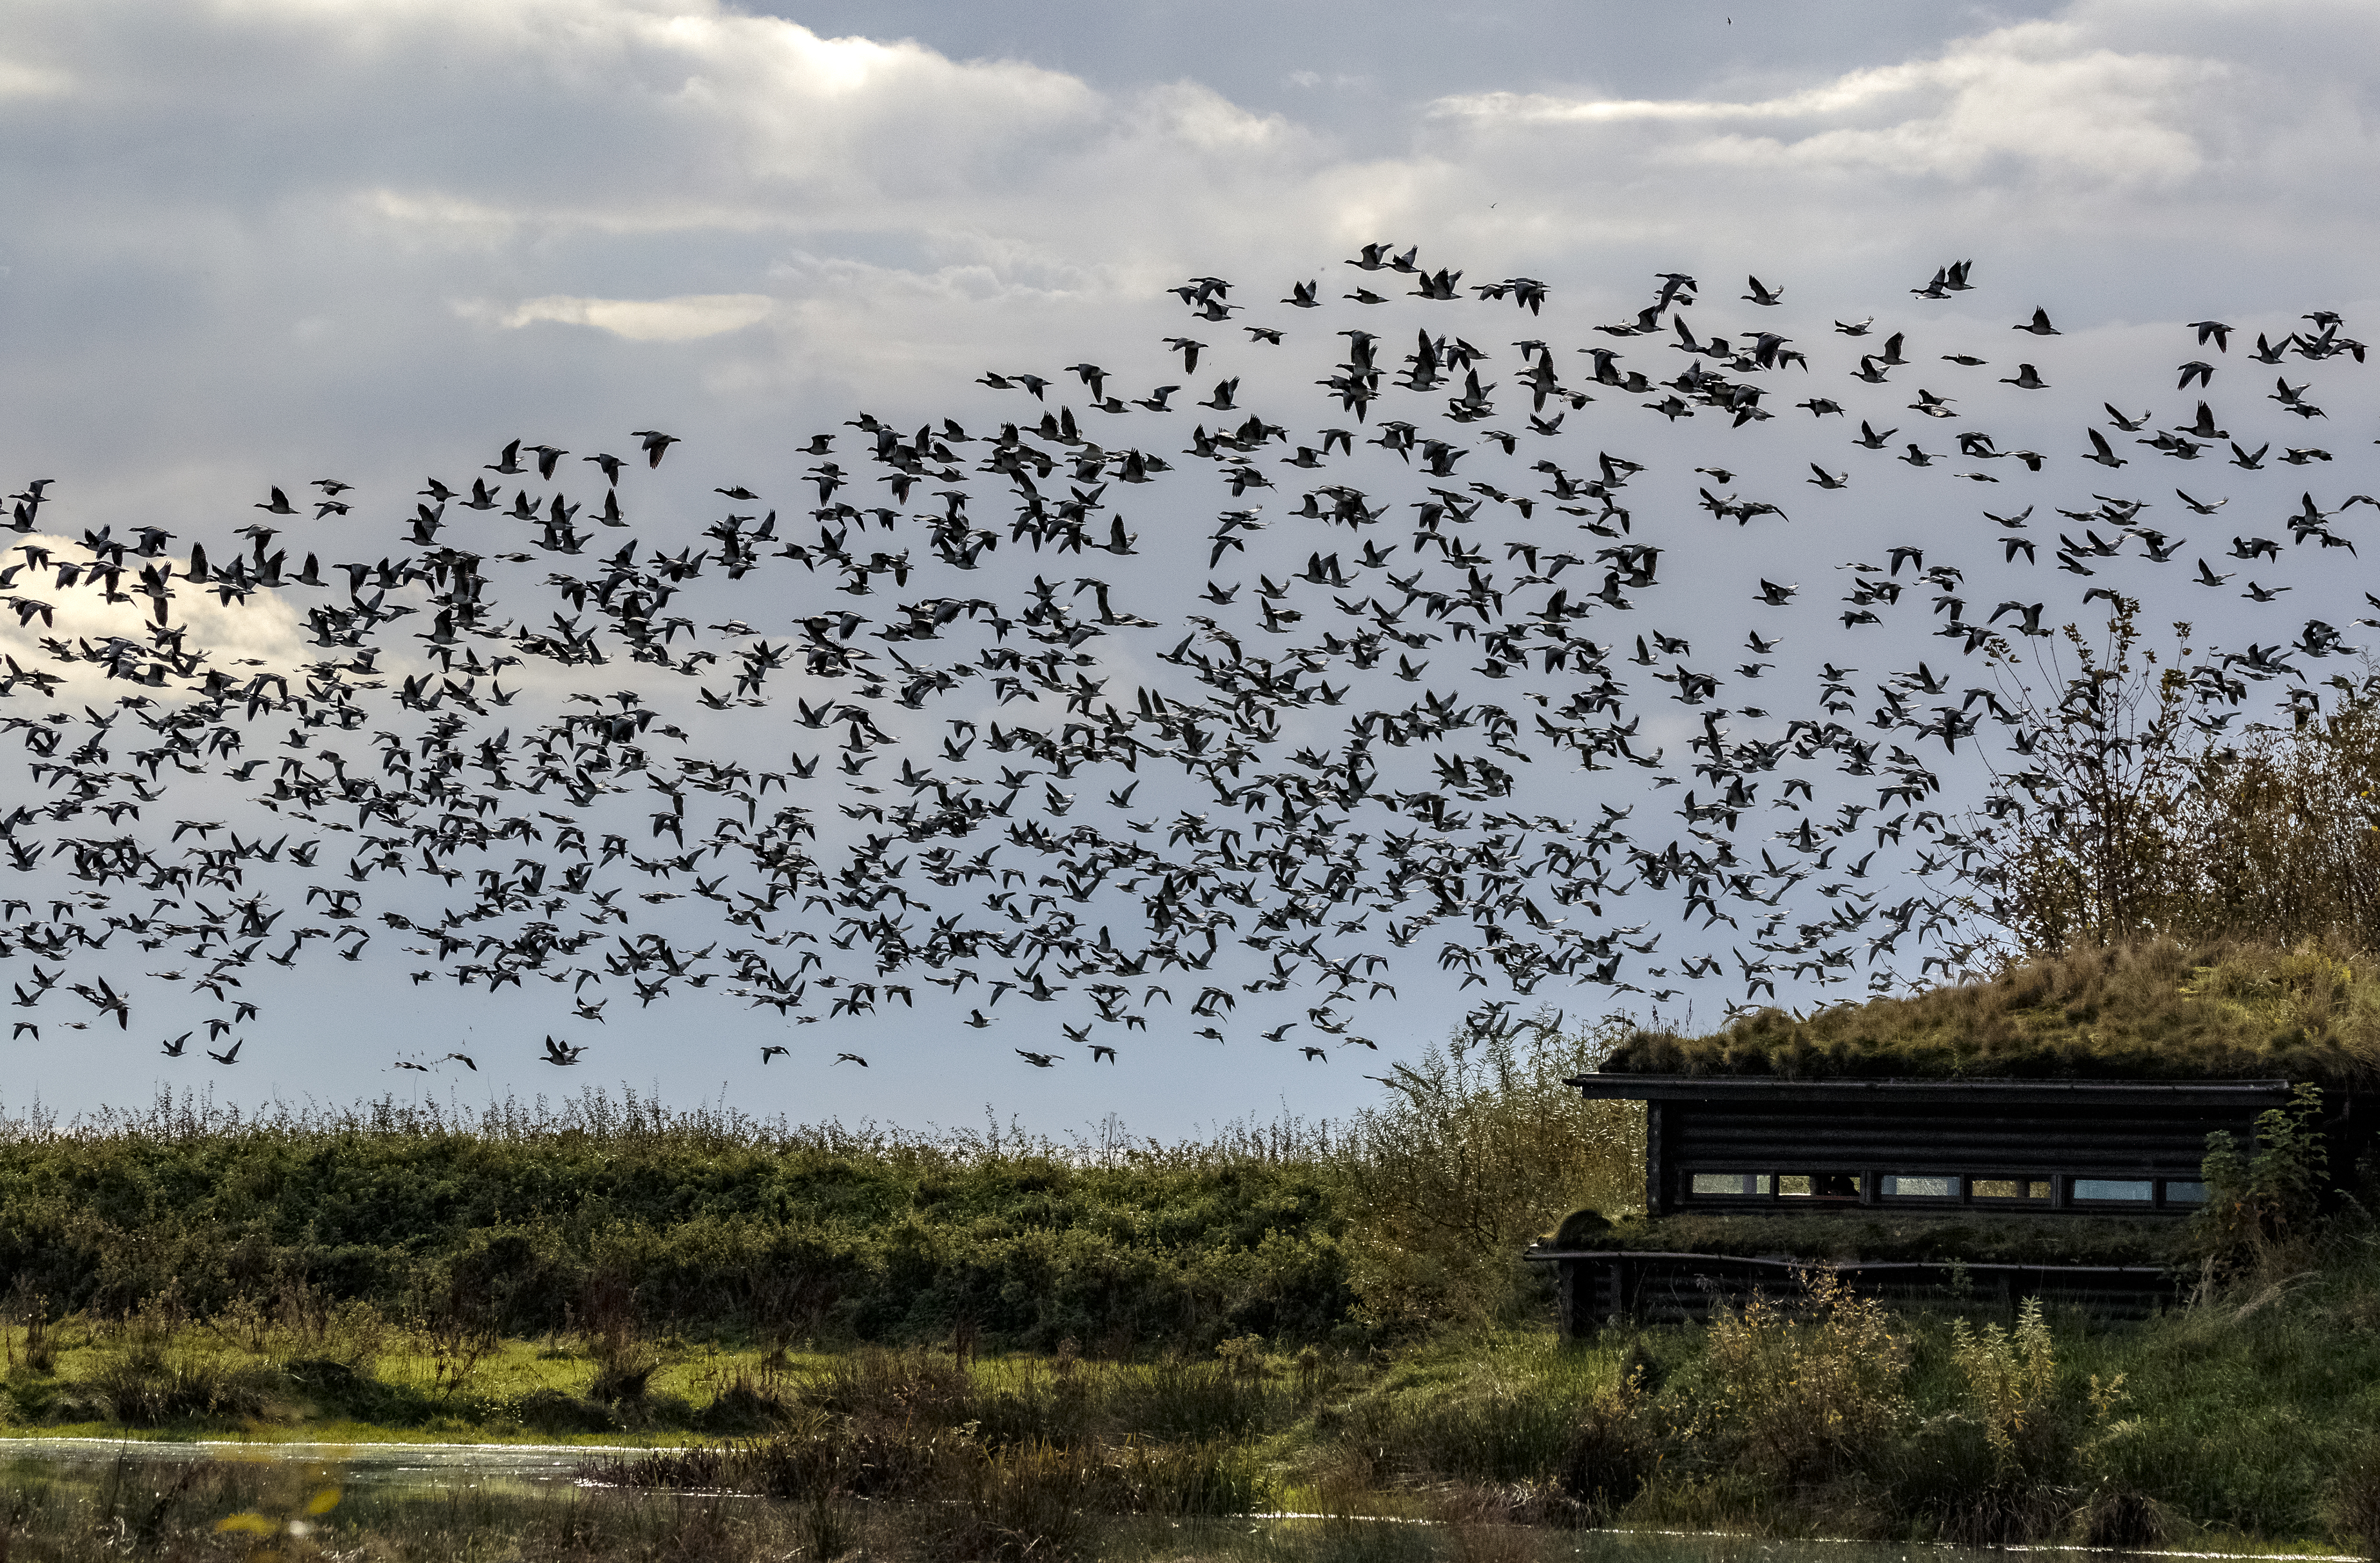 Fall for nature’s spectacle at WWT Caerlaverock Wetland Centre this autumn